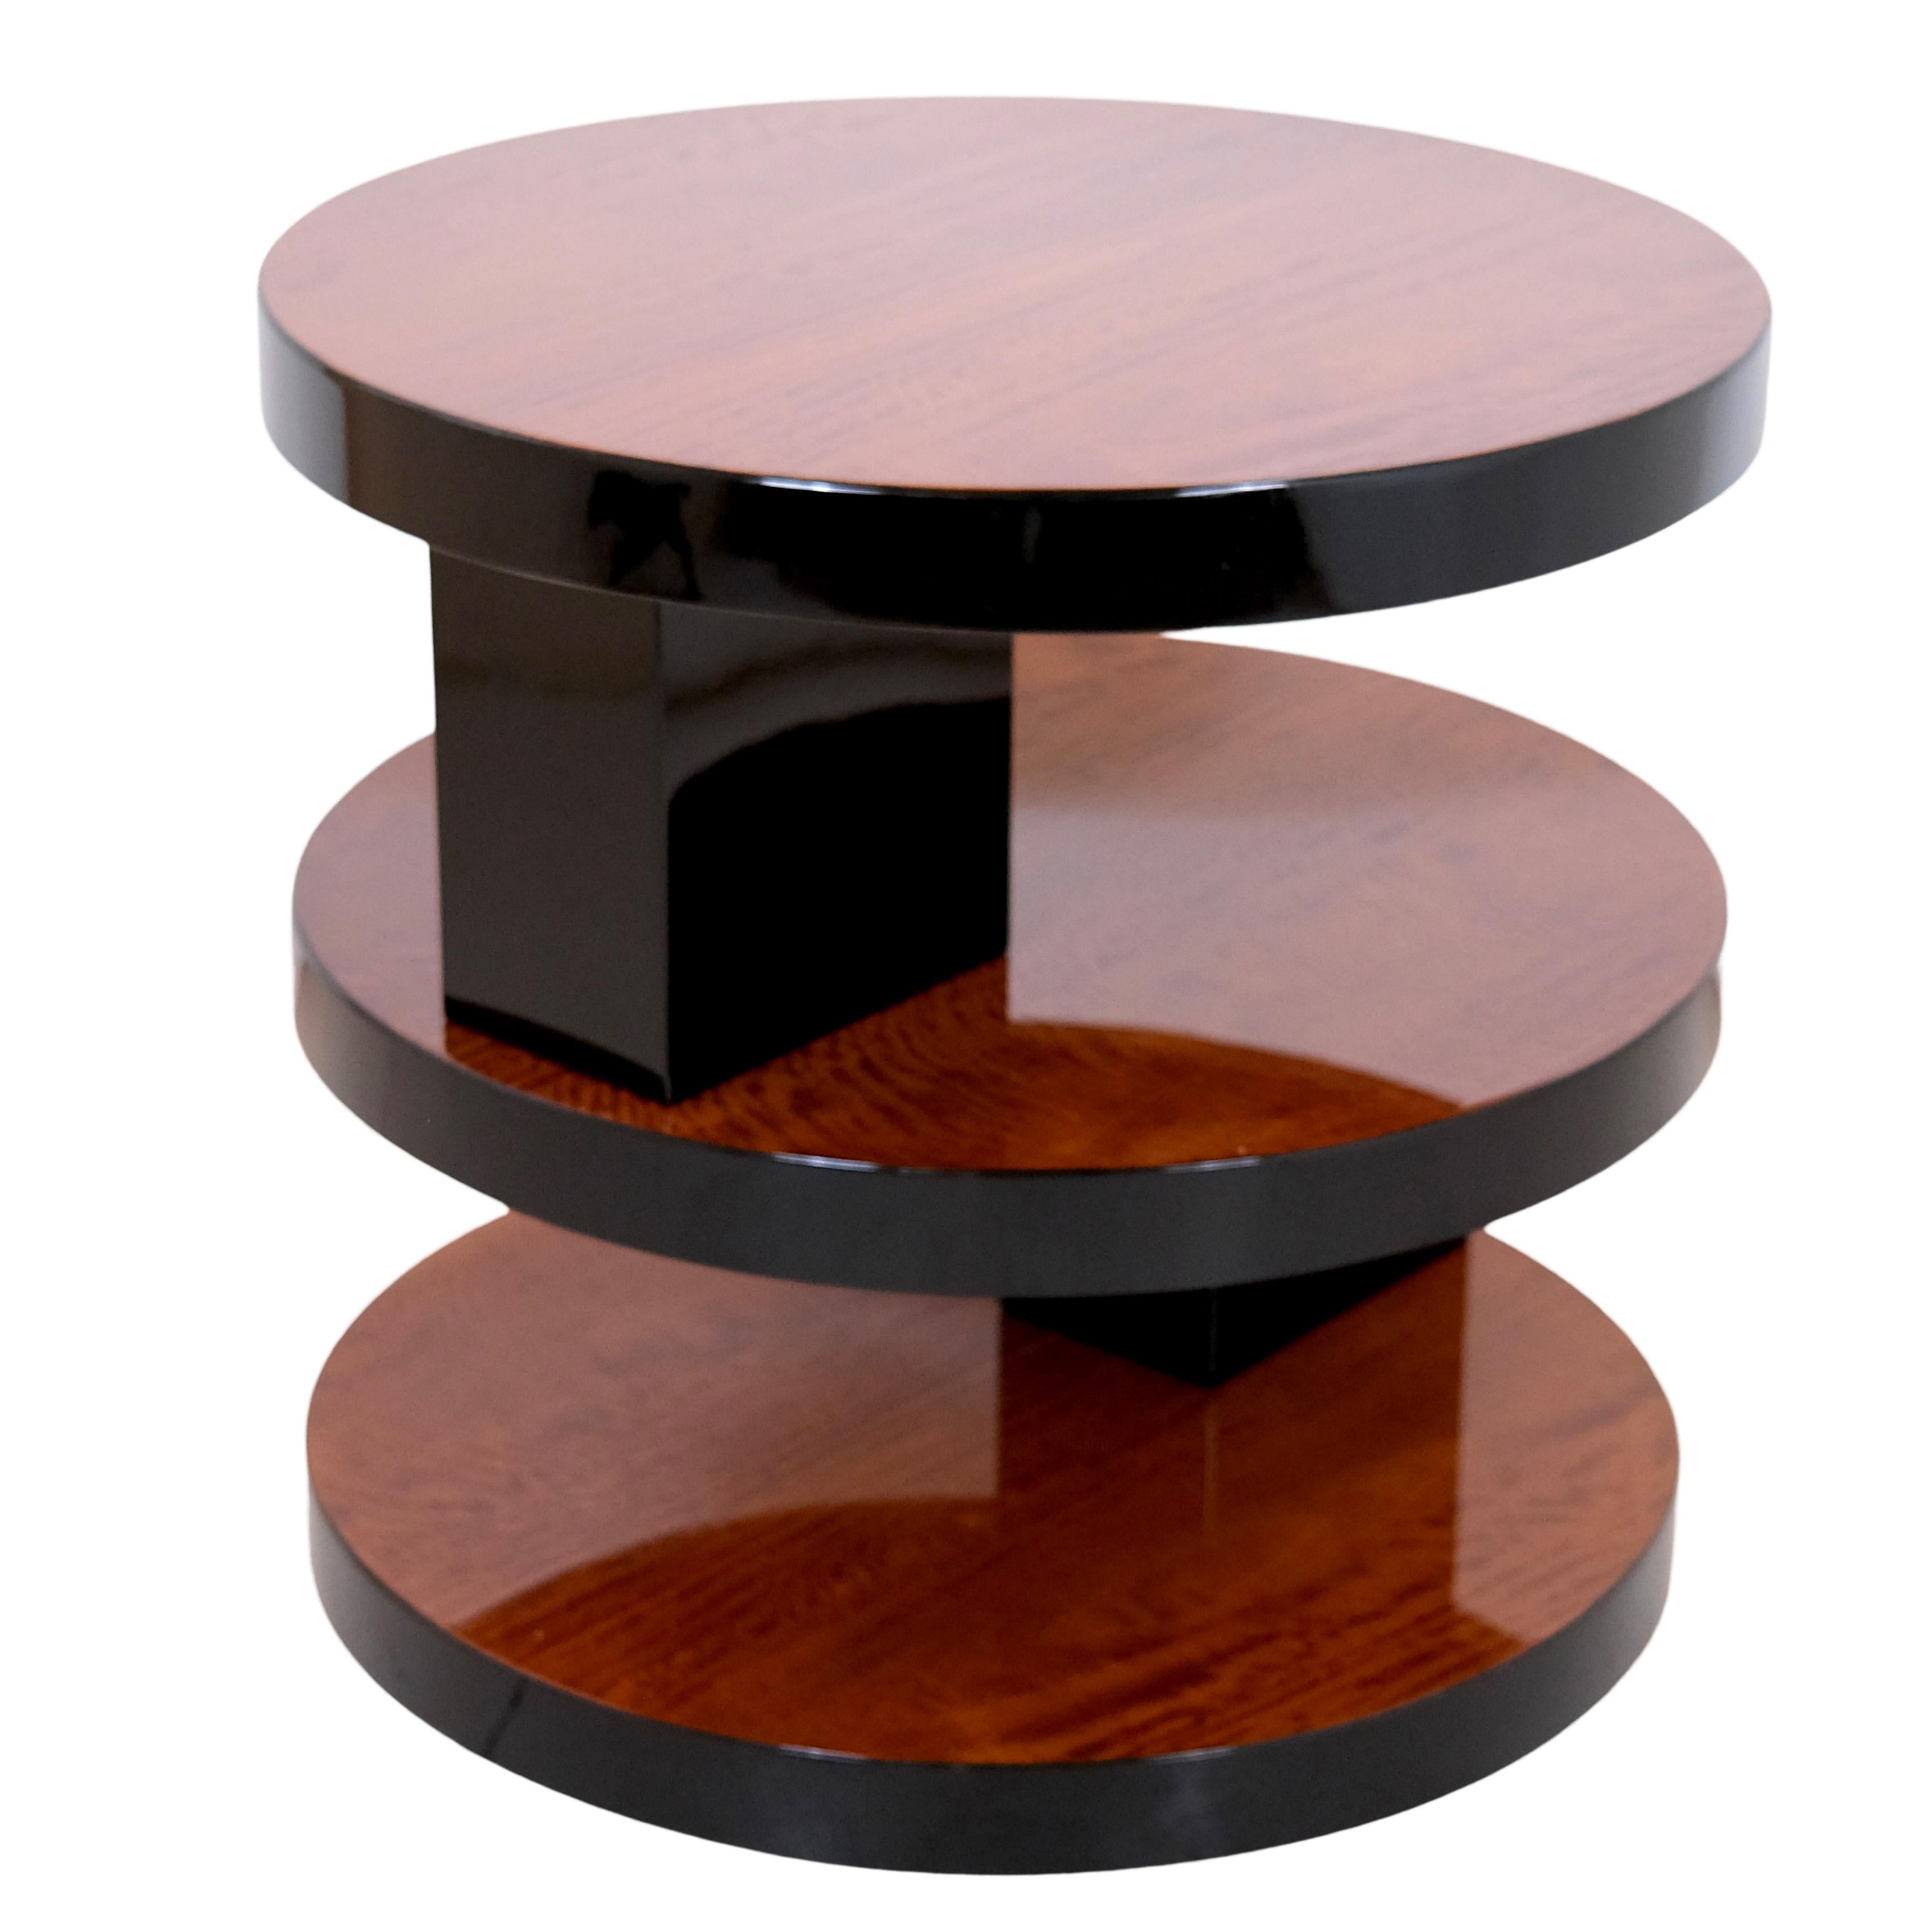 Mid-20th Century Round French Art Deco Mahogany Side Table with Black Lacquer with Three Levels